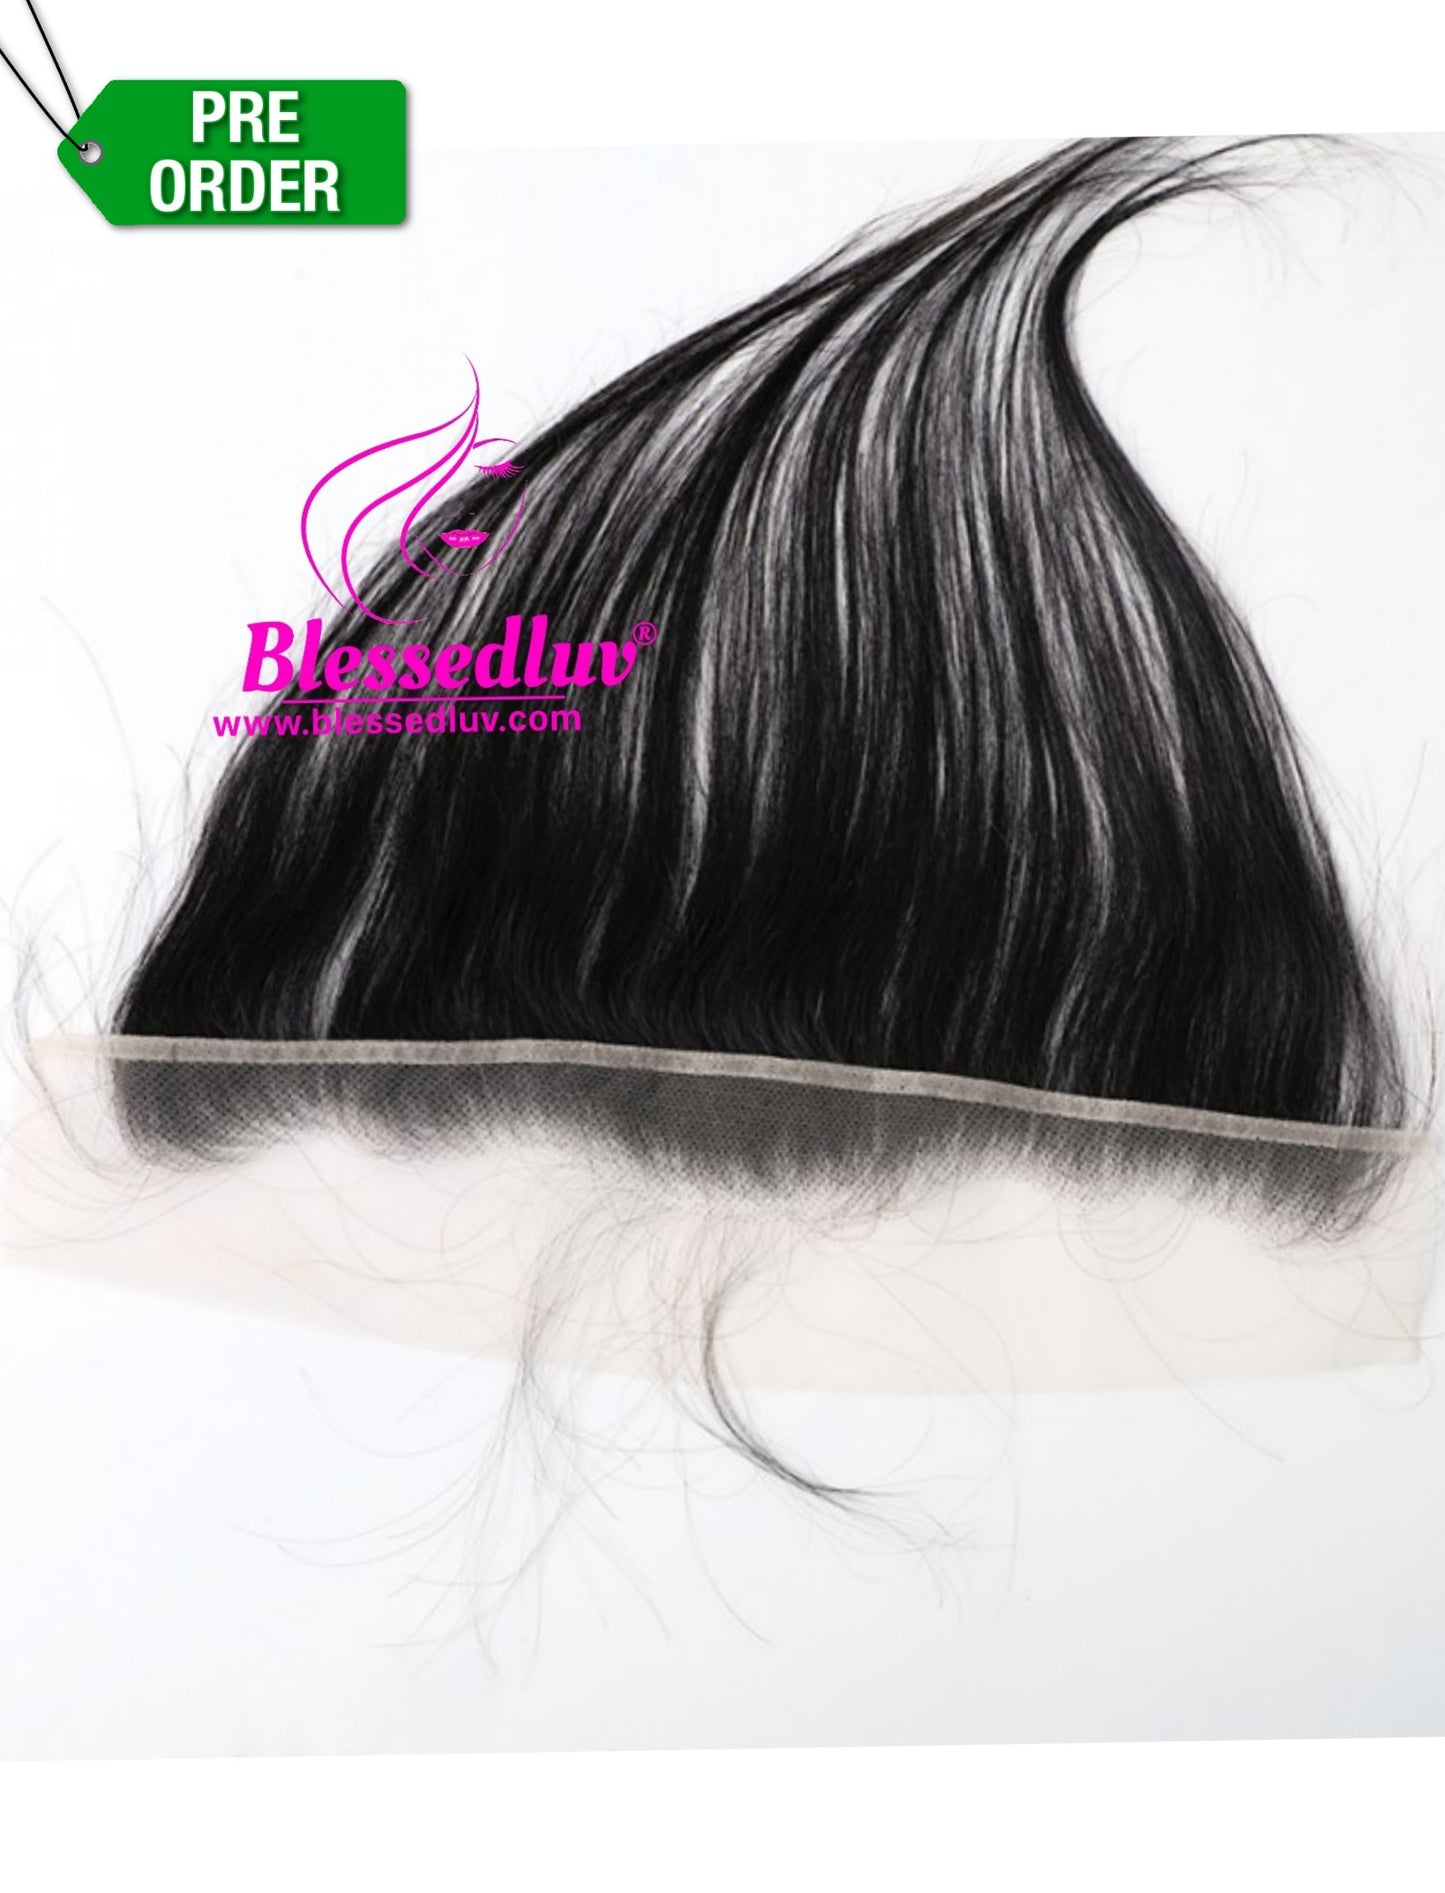 13x1 HD Swiss Lace Baby Hair- Straight-Wigs-www.blessedluv.com-Brazilianweave.com